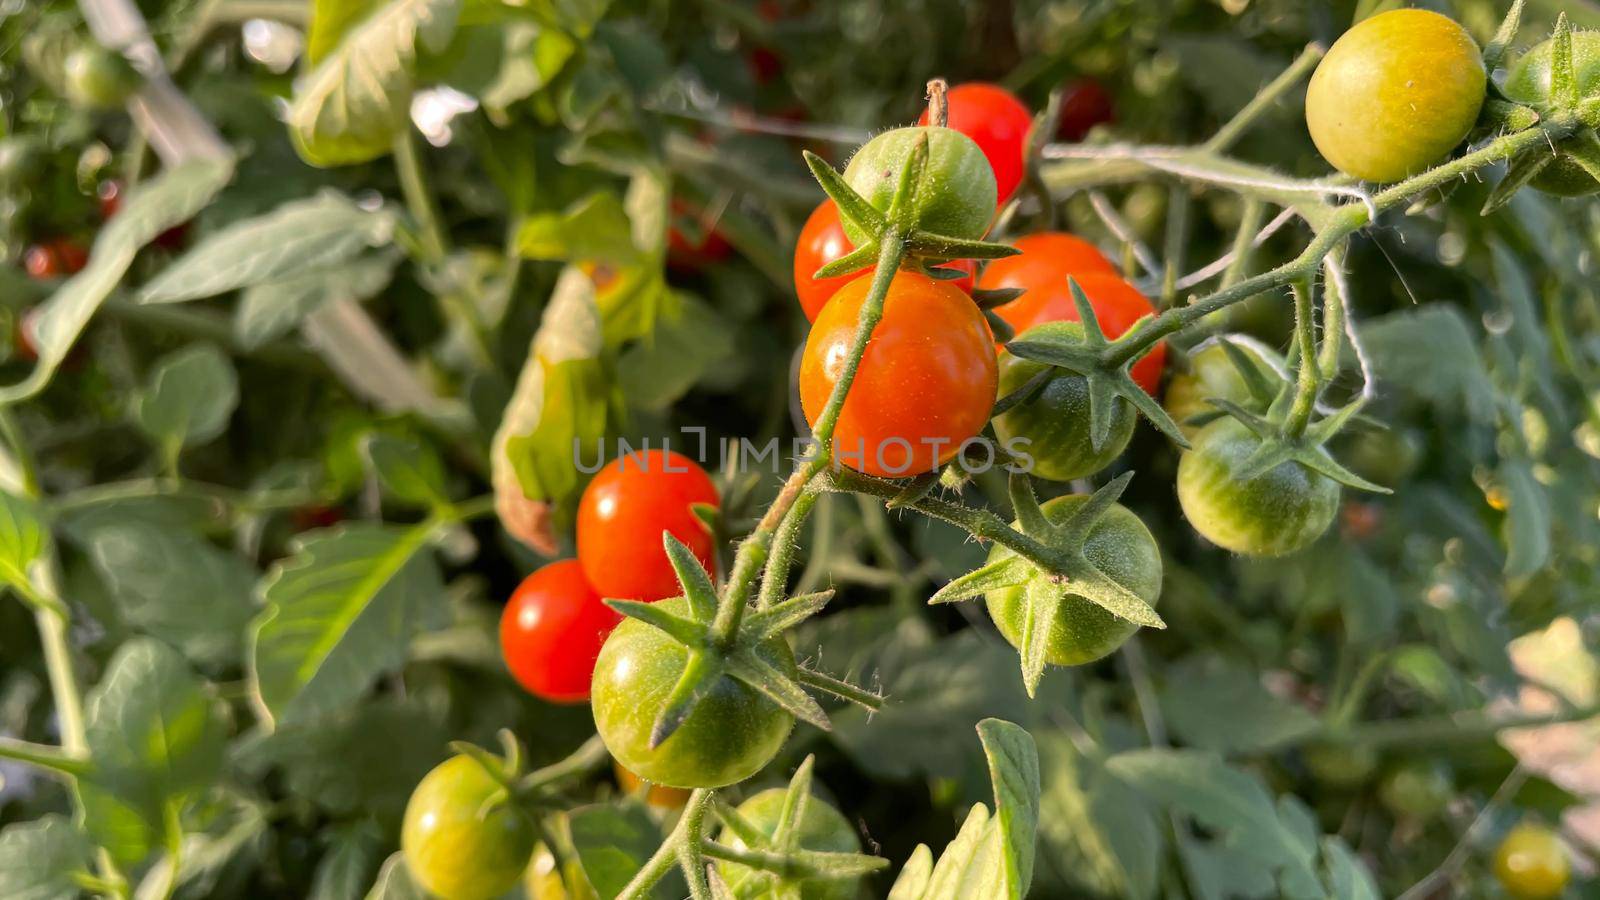 ripe small round tomatoes in the garden.